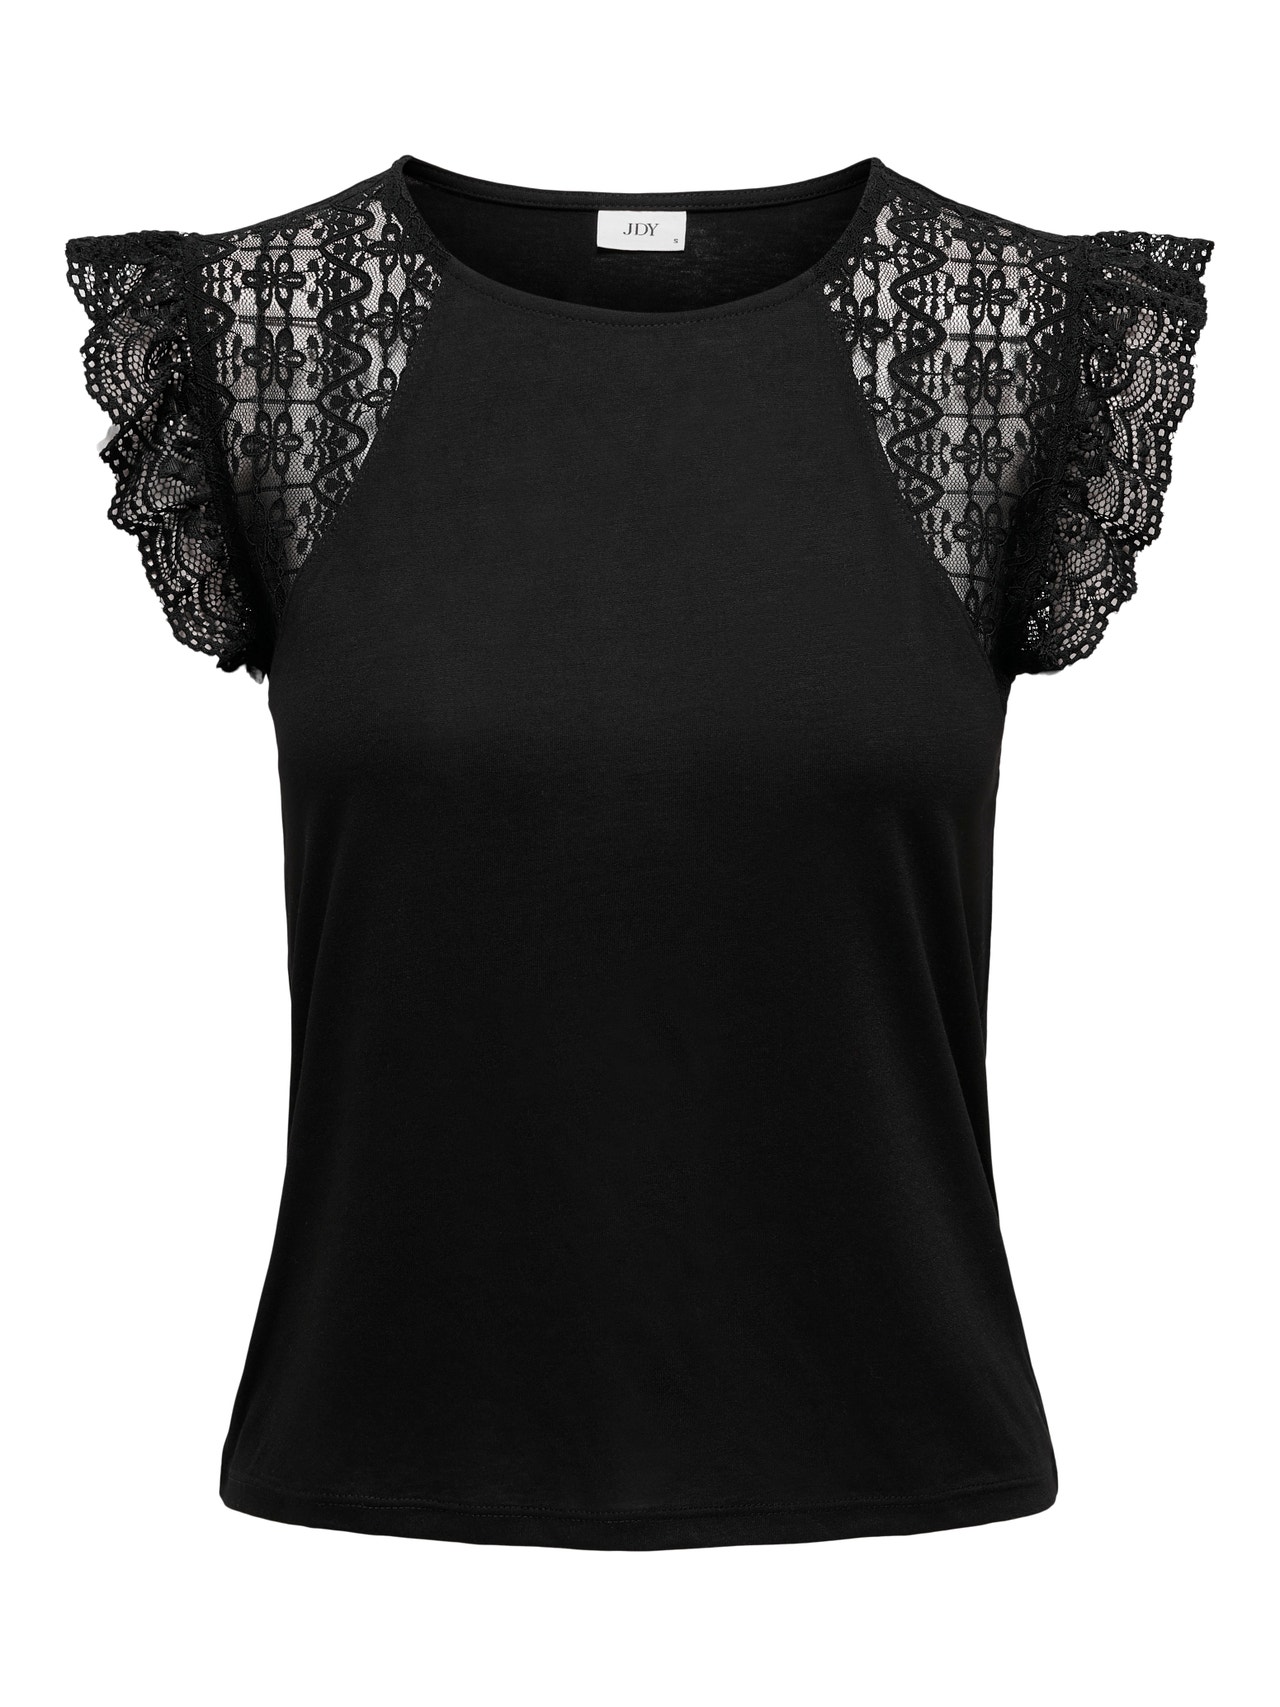 ONLY Top with lace and frills -Black - 15297387